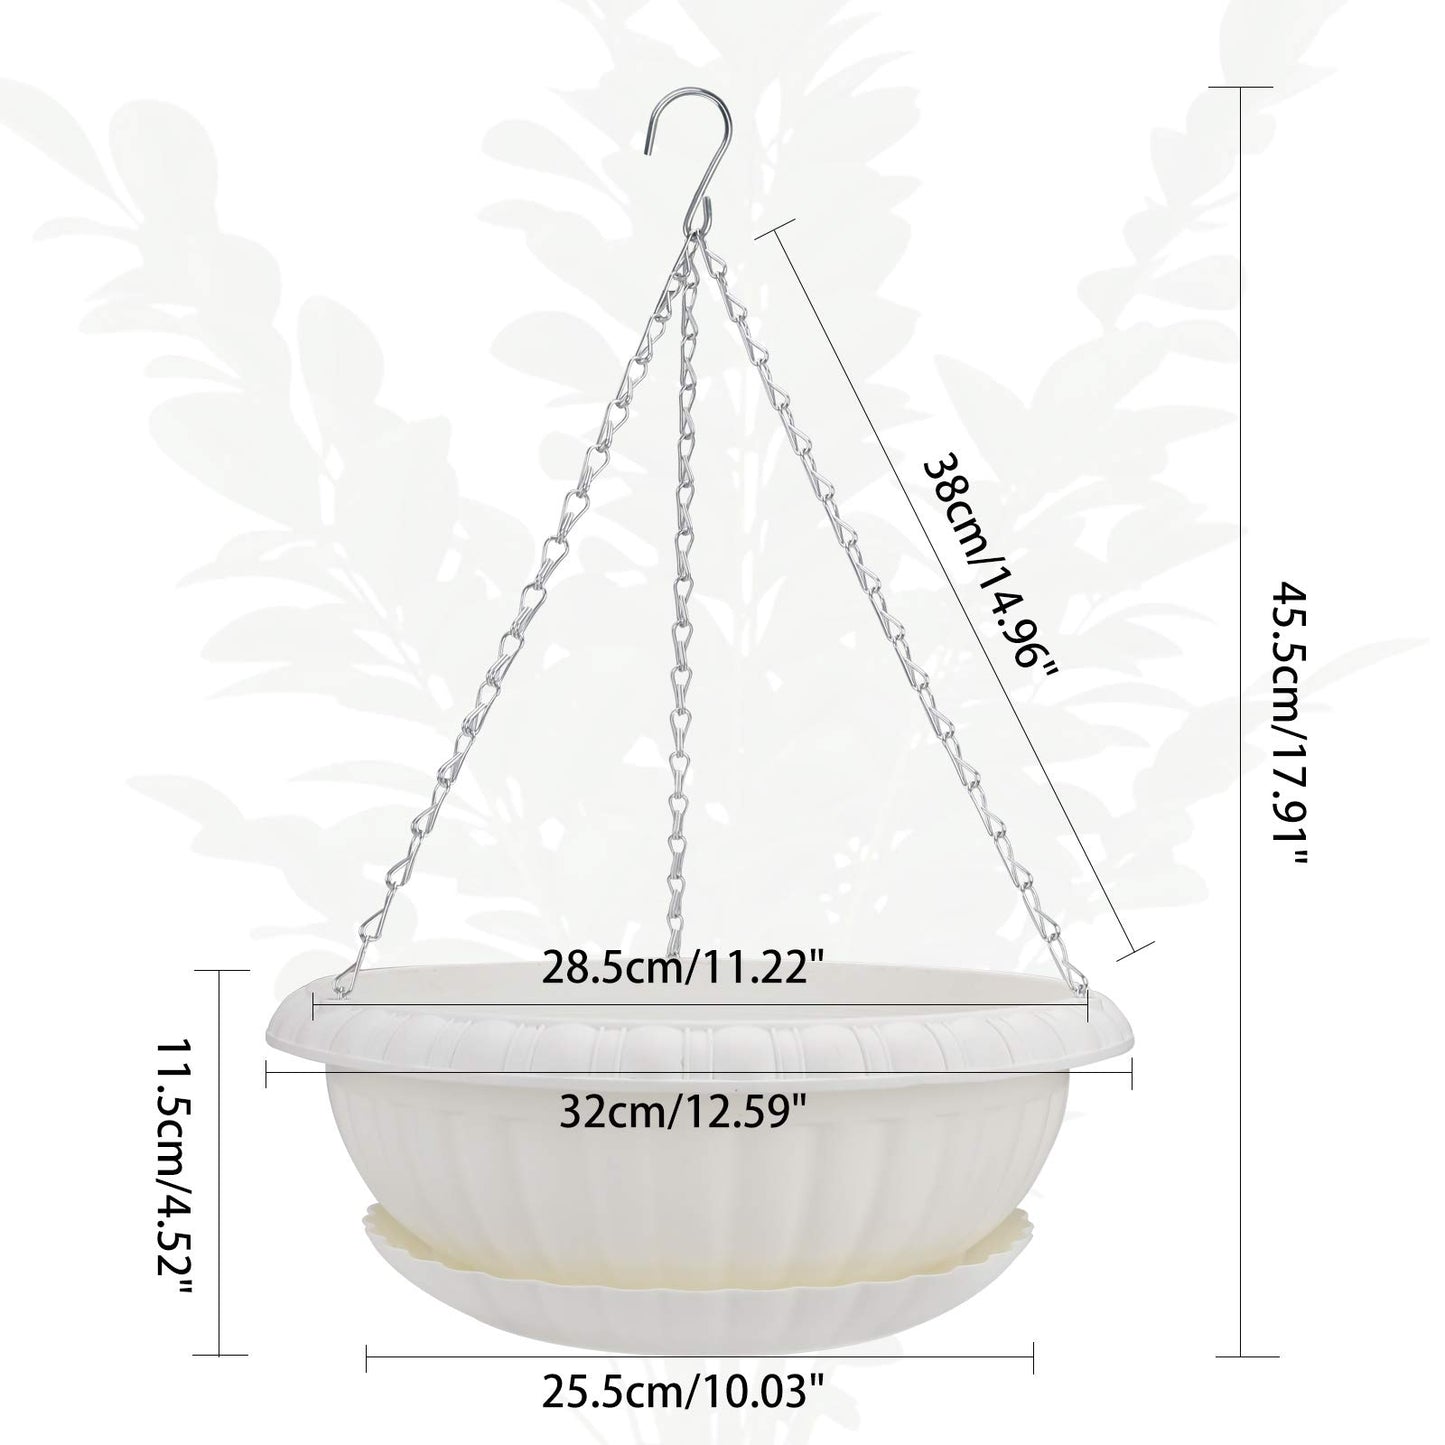 summer flower 12.59" Large Hanging Planters with Drainage Hole&Tray, Hanging Flower Pots Plastic Plant Hanger Holders Hanging Basket for Indoor Outdoor Home Garden Herb Succulent (Pack 3)